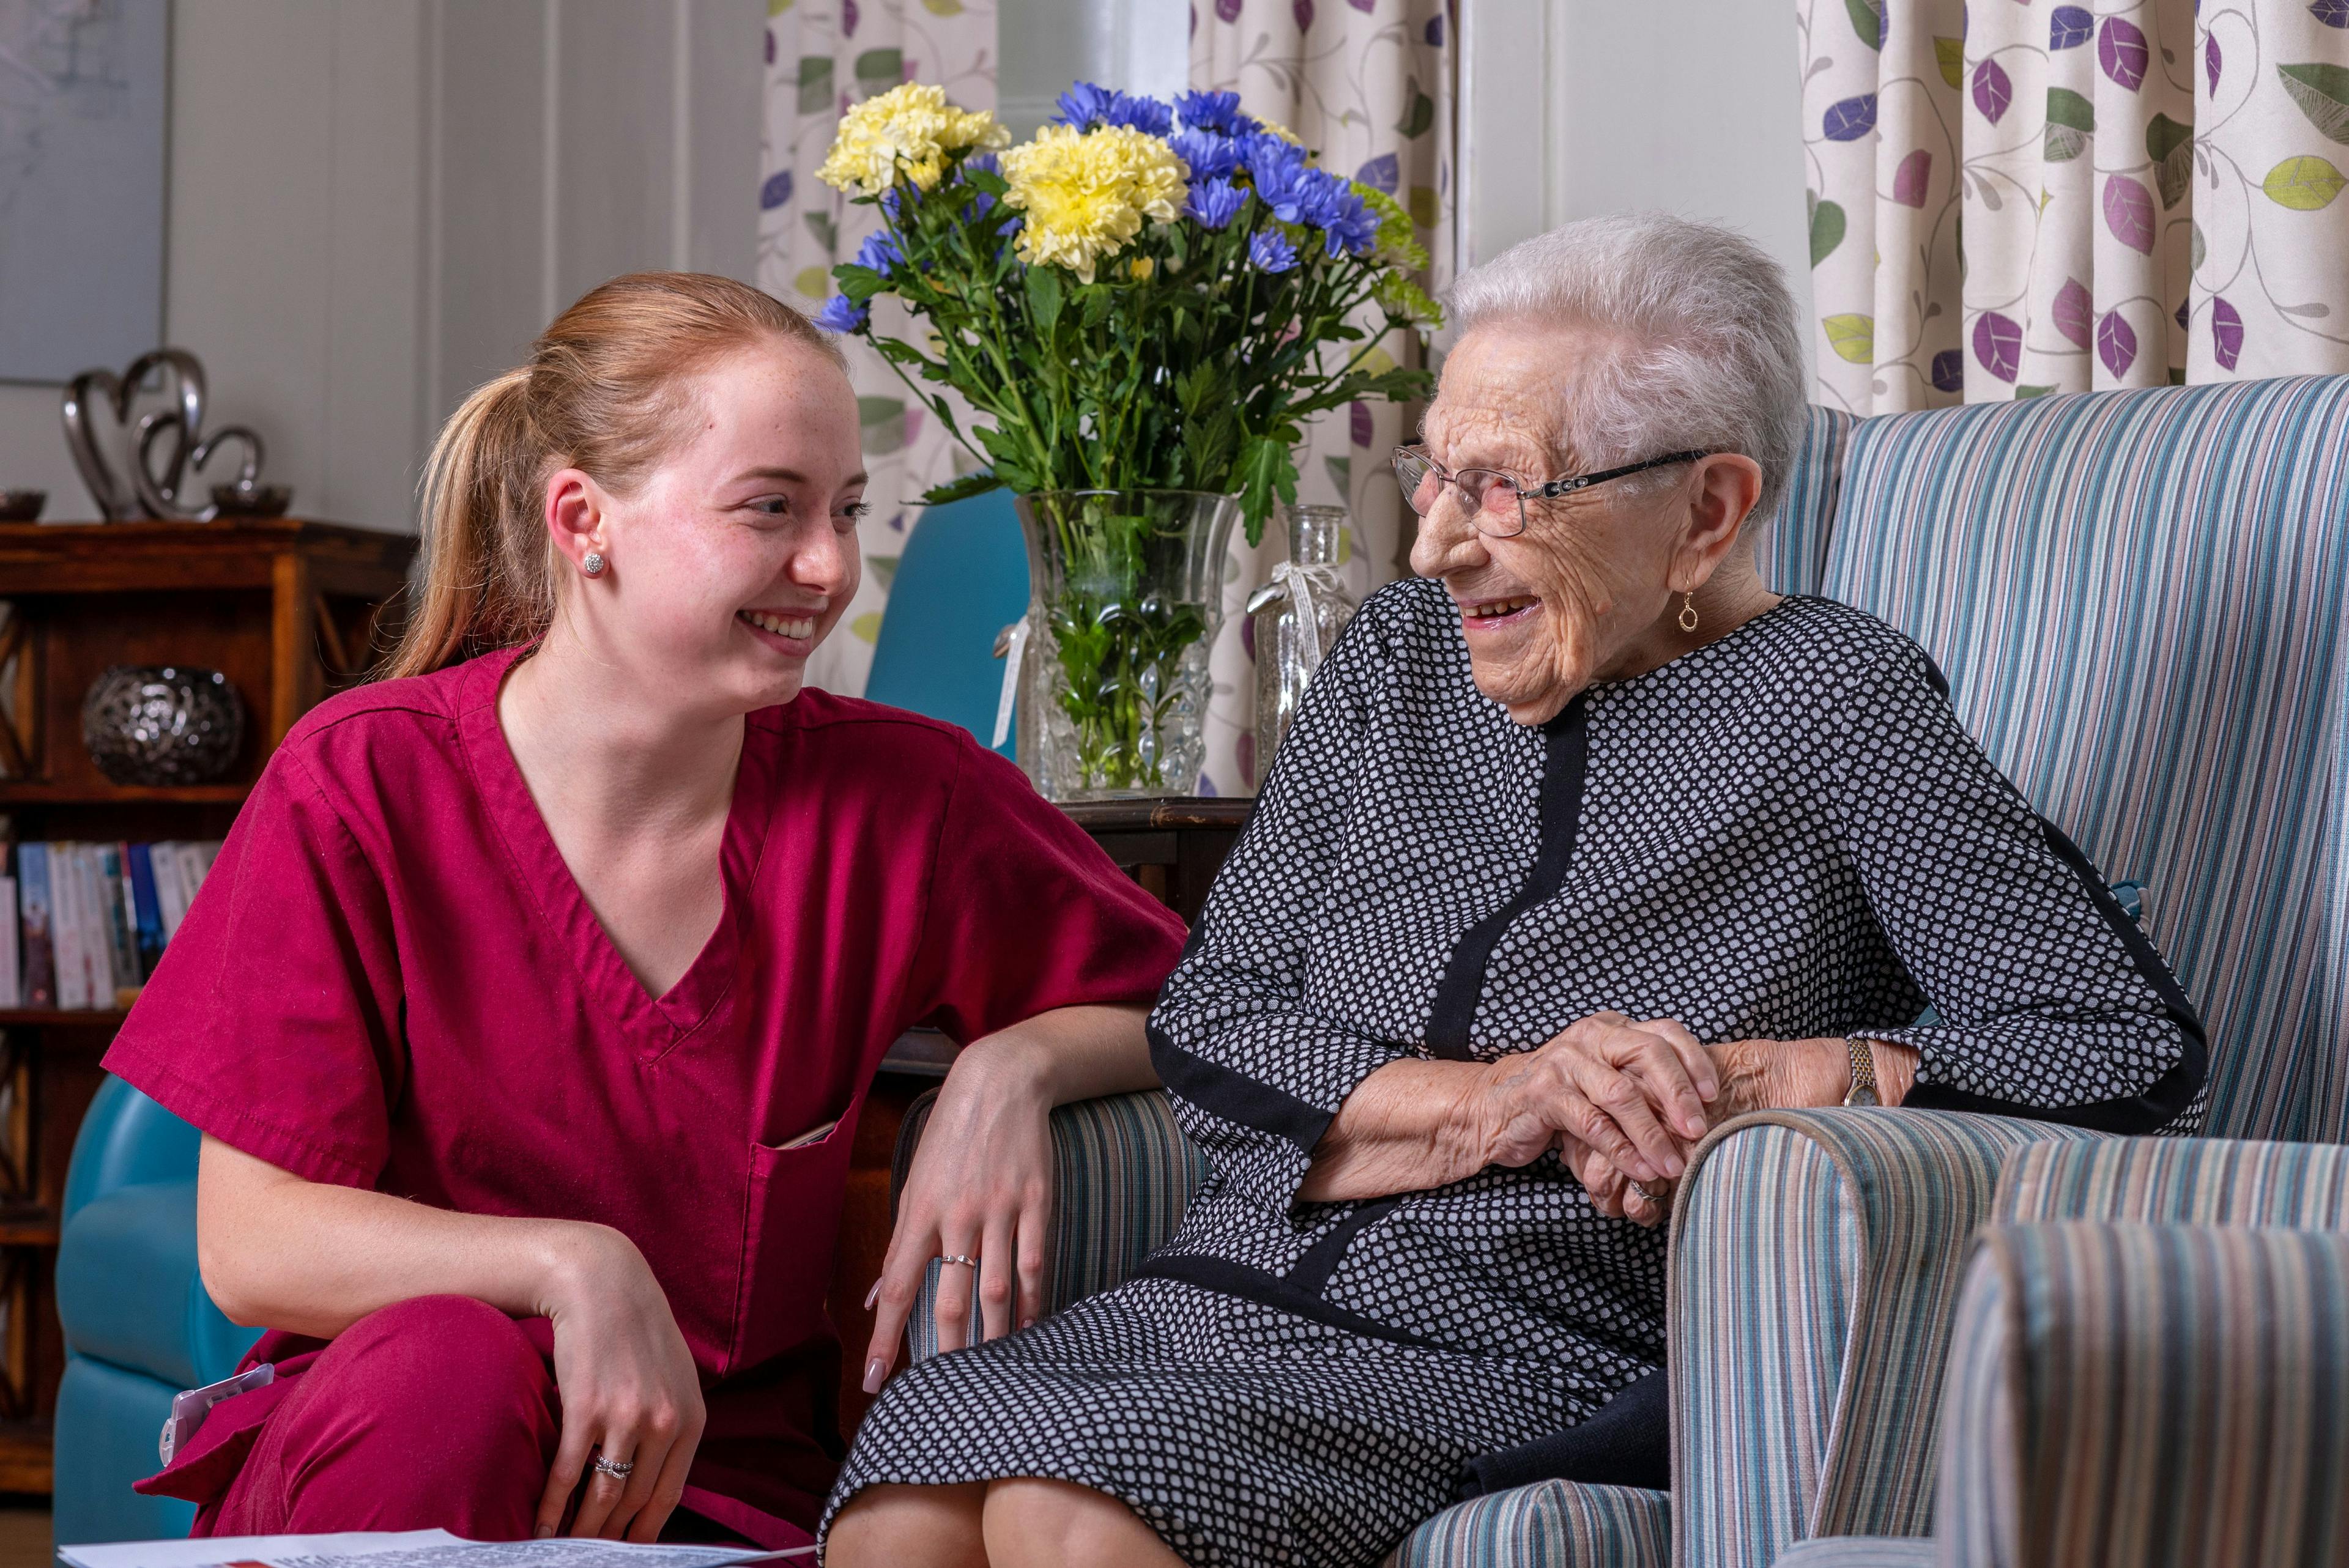 Staff of Grace Manor care home in Gillingham, Kent